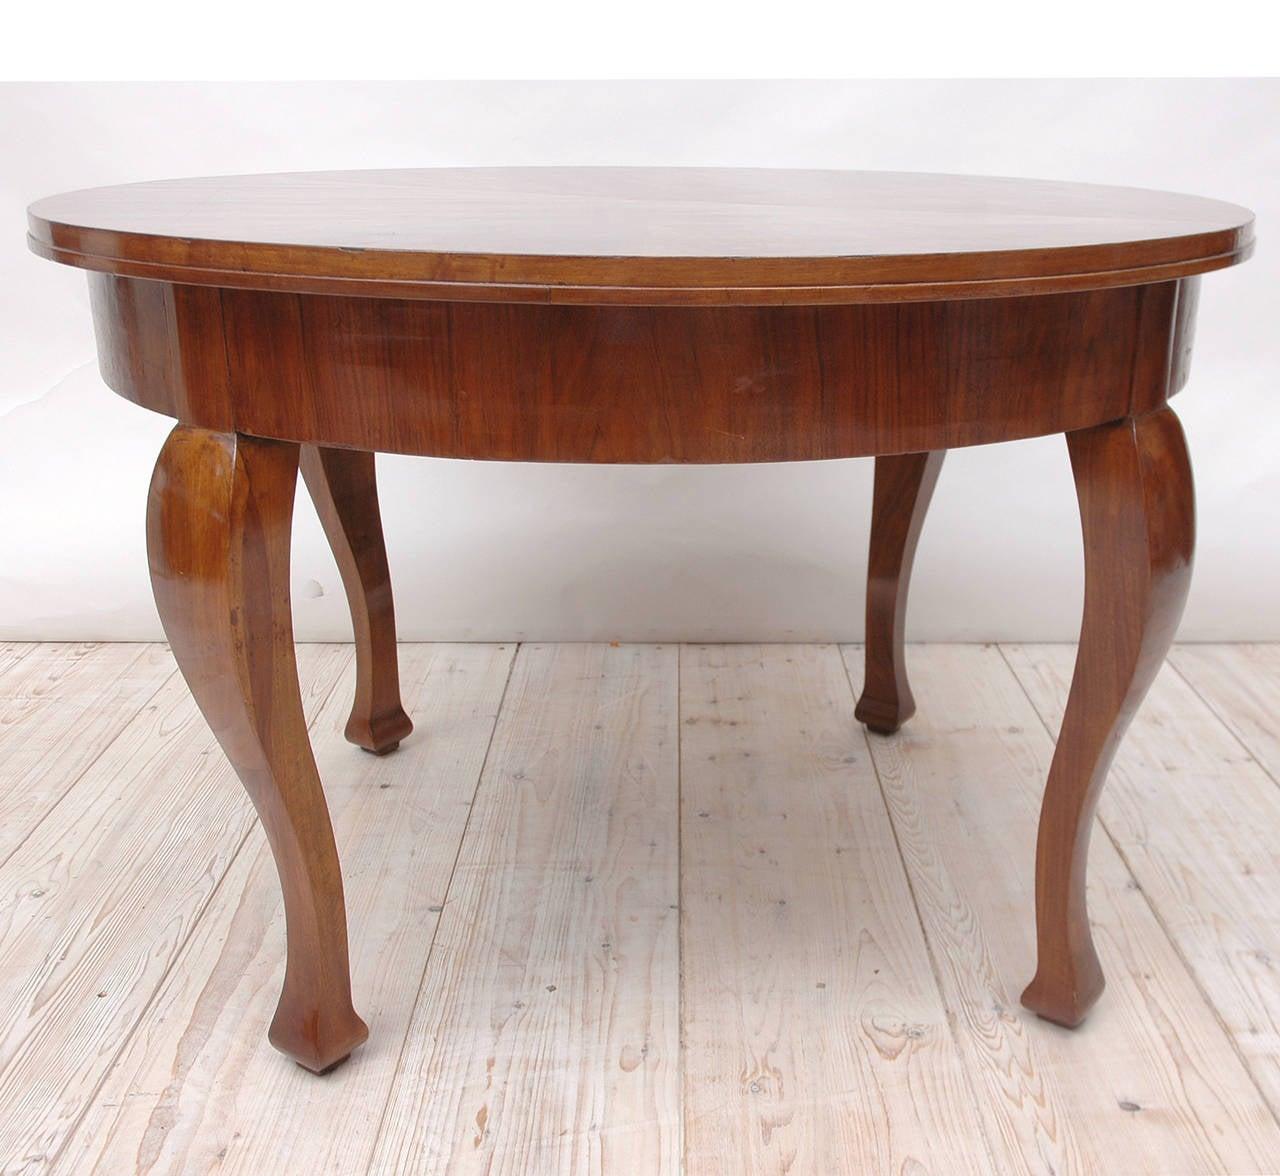 A very beautifully designed & well-crafted French Art Deco table in walnut with round figured-walnut top resting on stylized cabriole legs. Offers a fresh & classic look with a fine stream-lined design with a focus on the sumptuous play of figured